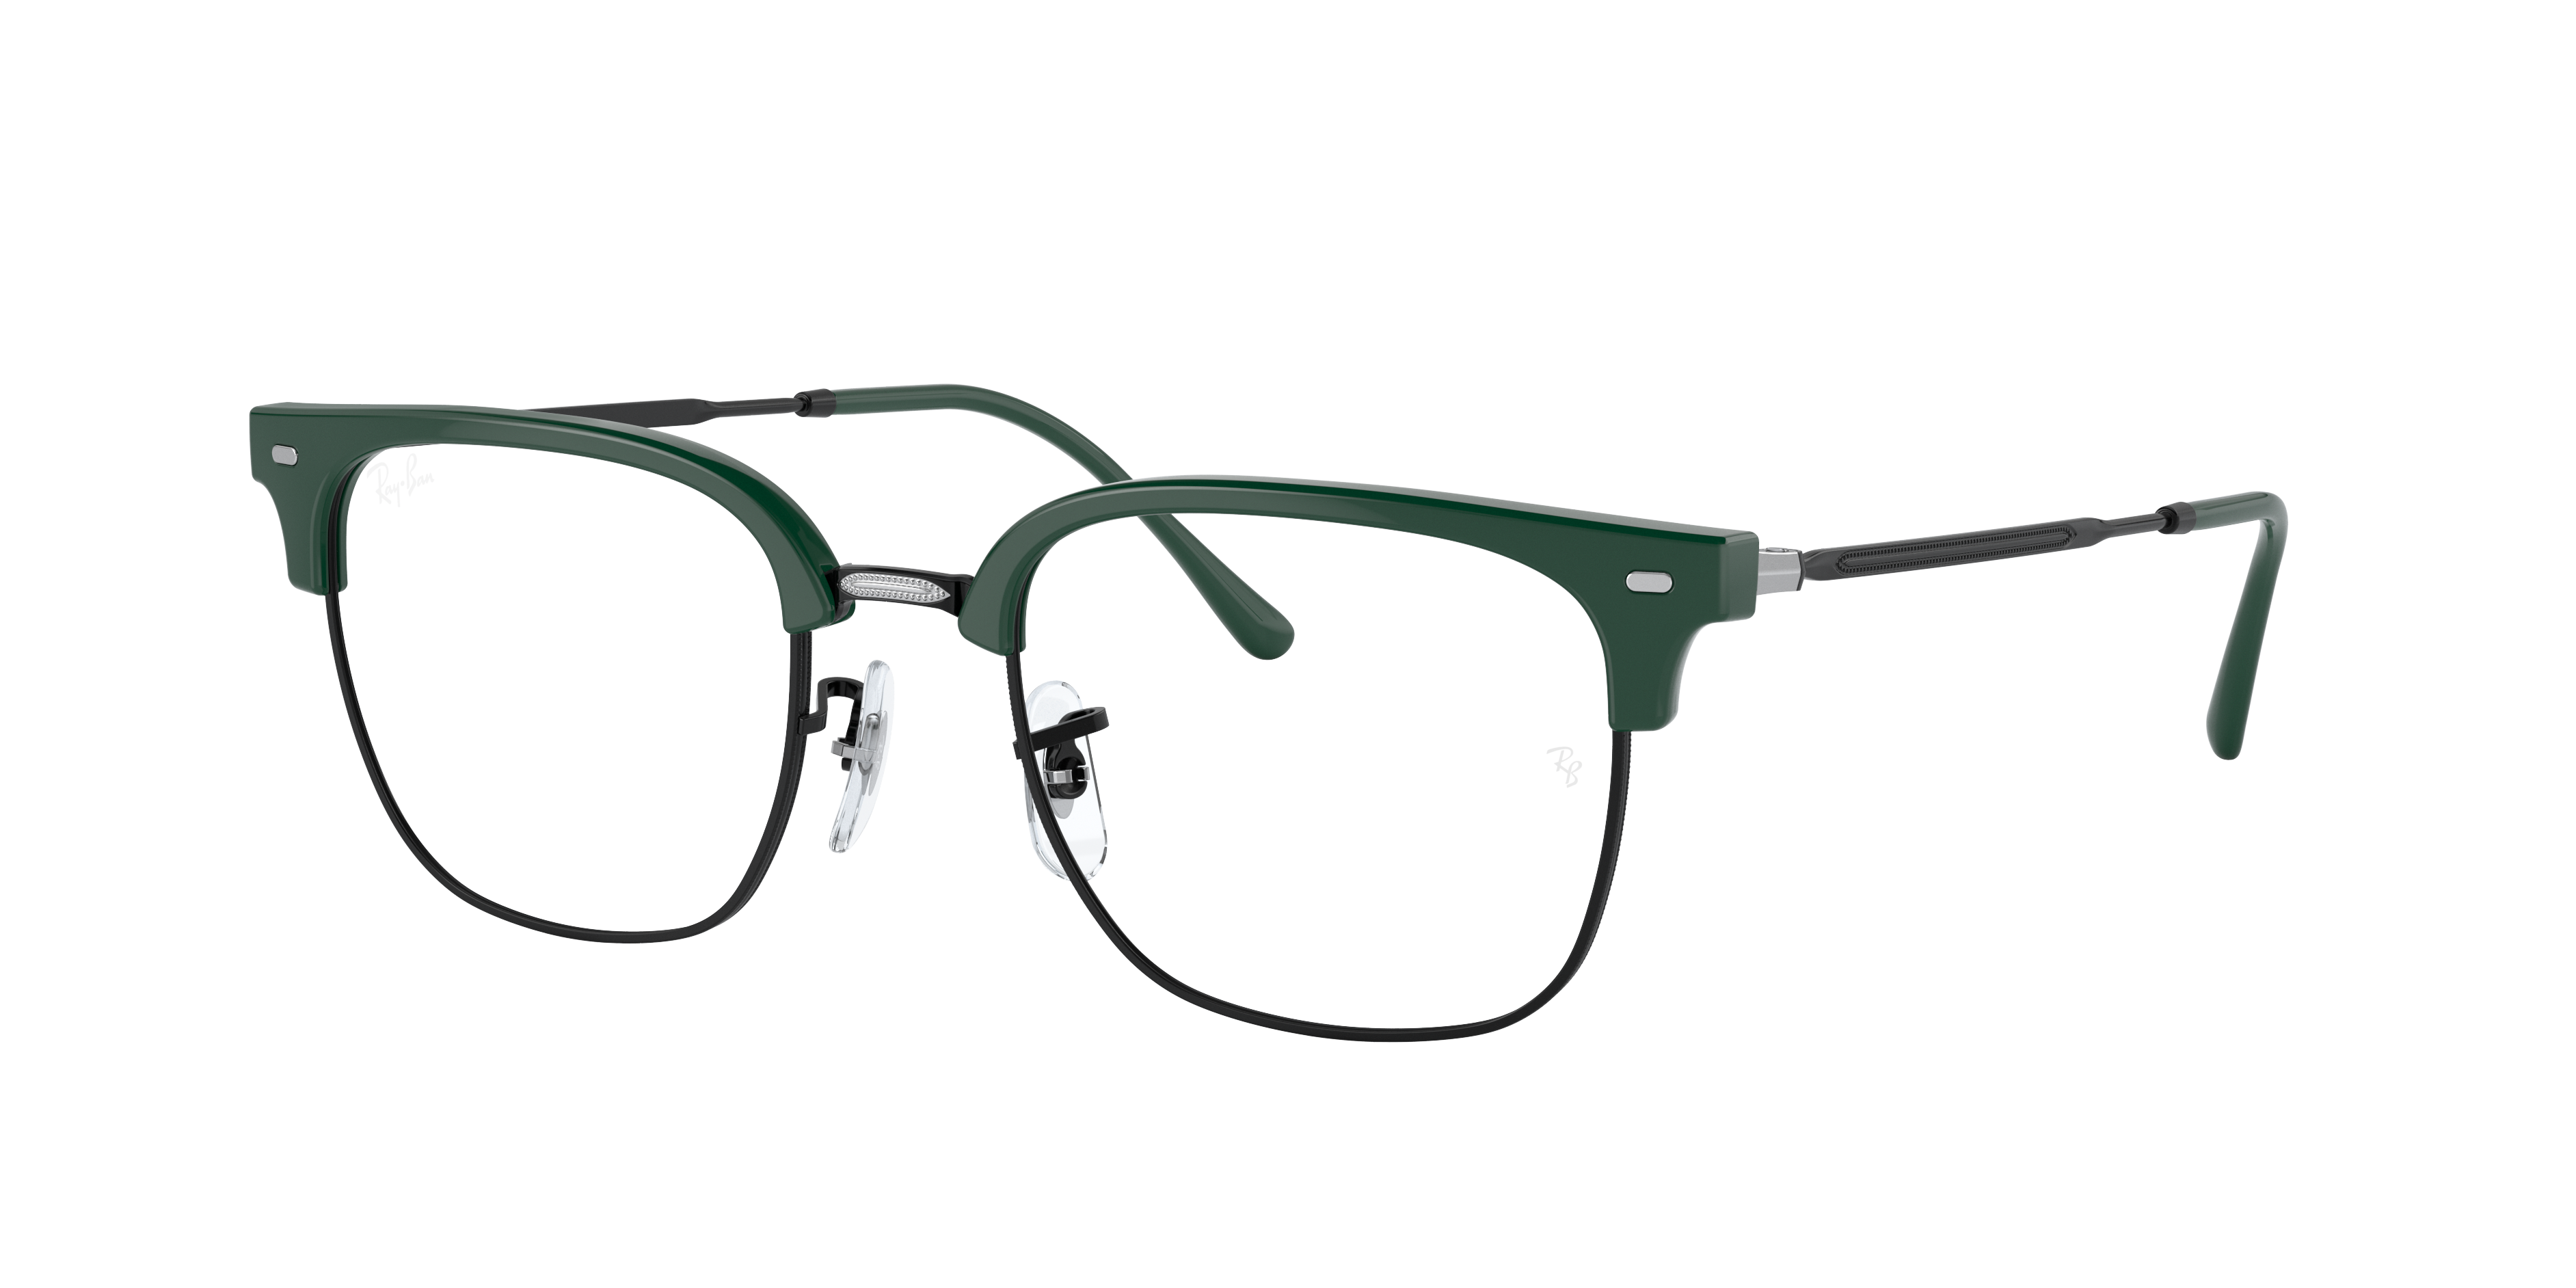 New Clubmaster Optics Eyeglasses With Green On Black Frame Ray Ban